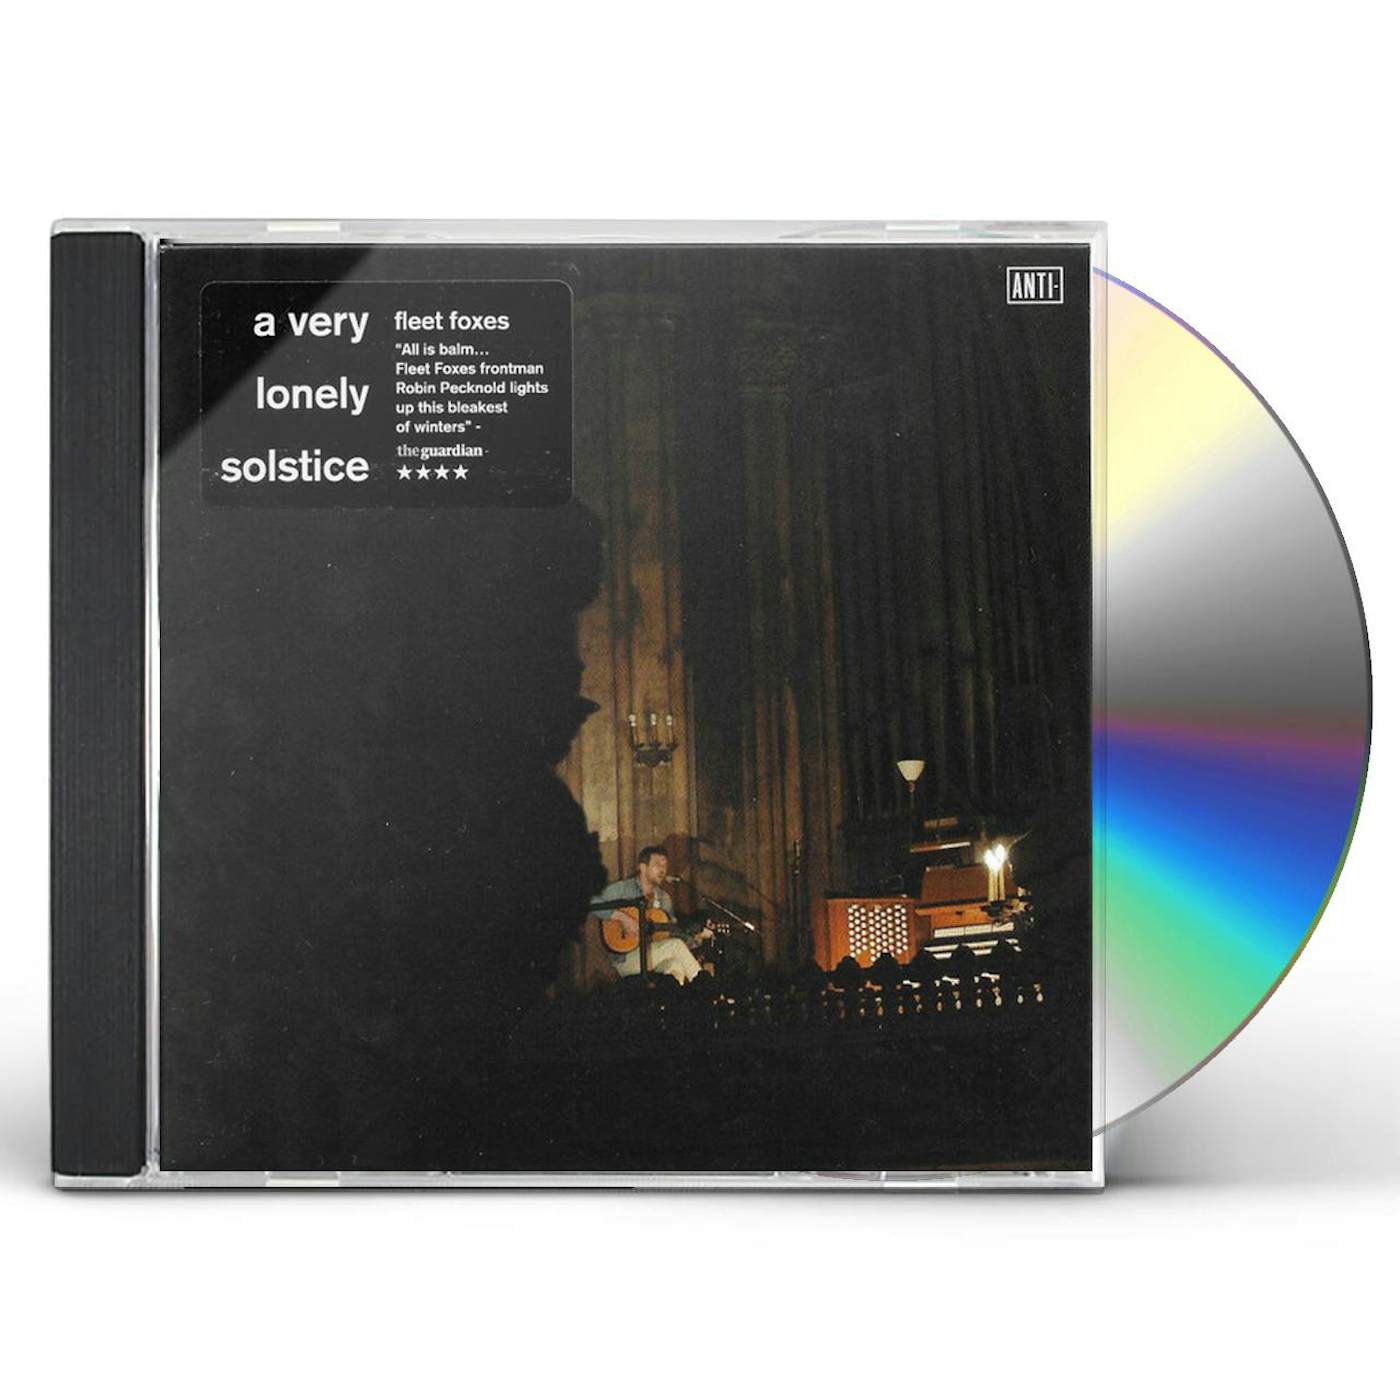 Fleet Foxes VERY LONELY SOLSTICE CD